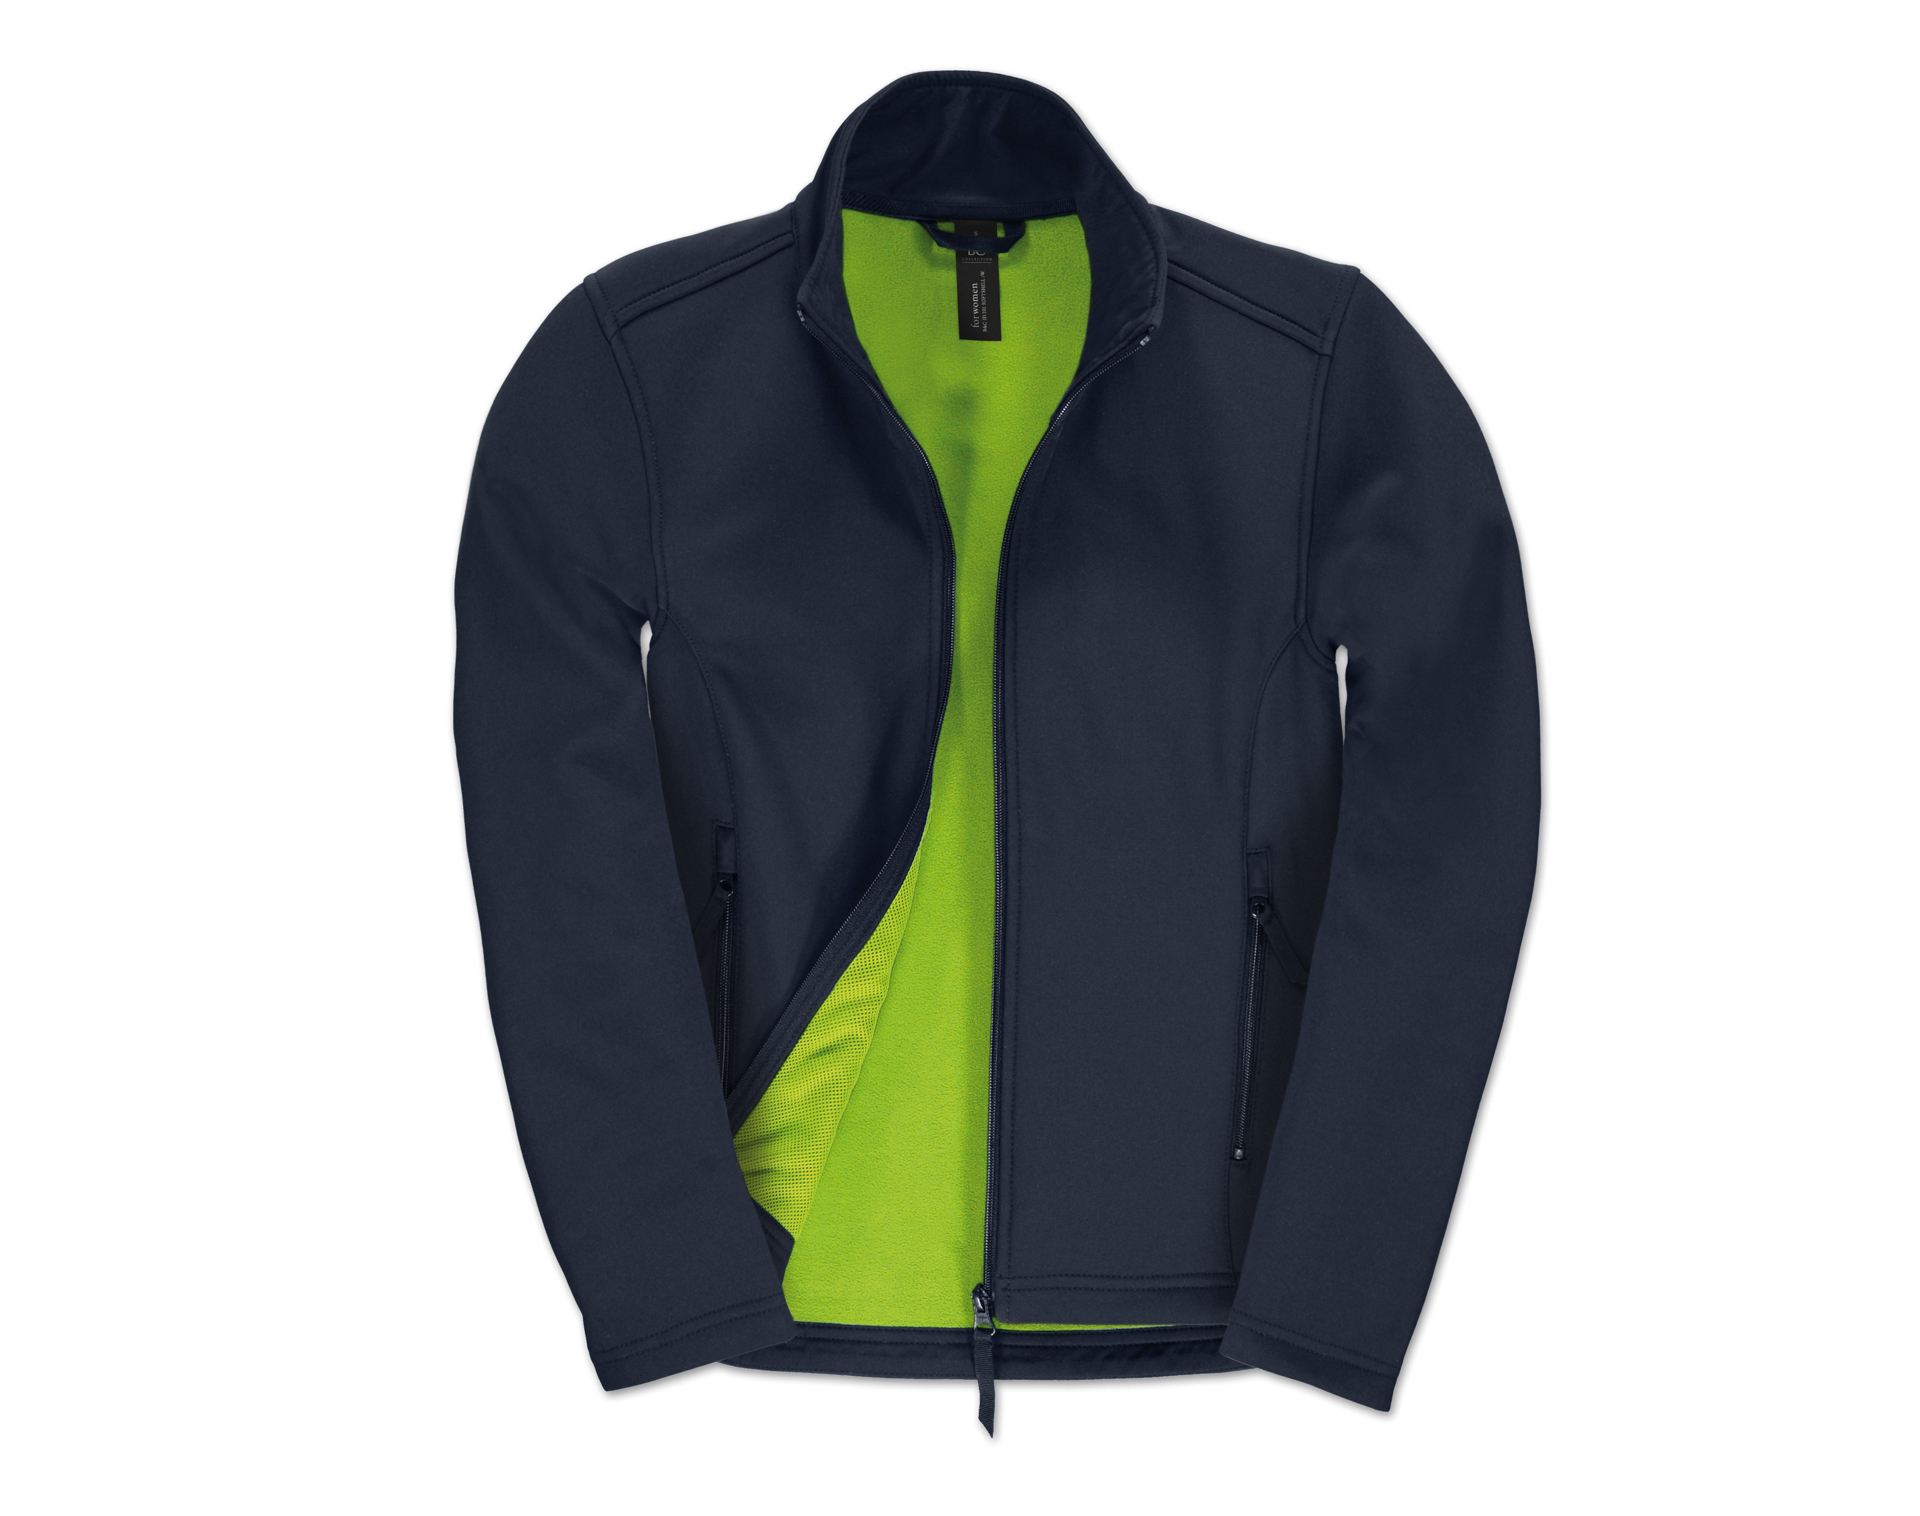 Womens ID 701 Softshell Jacket in navy with full front zip and green inner fleece